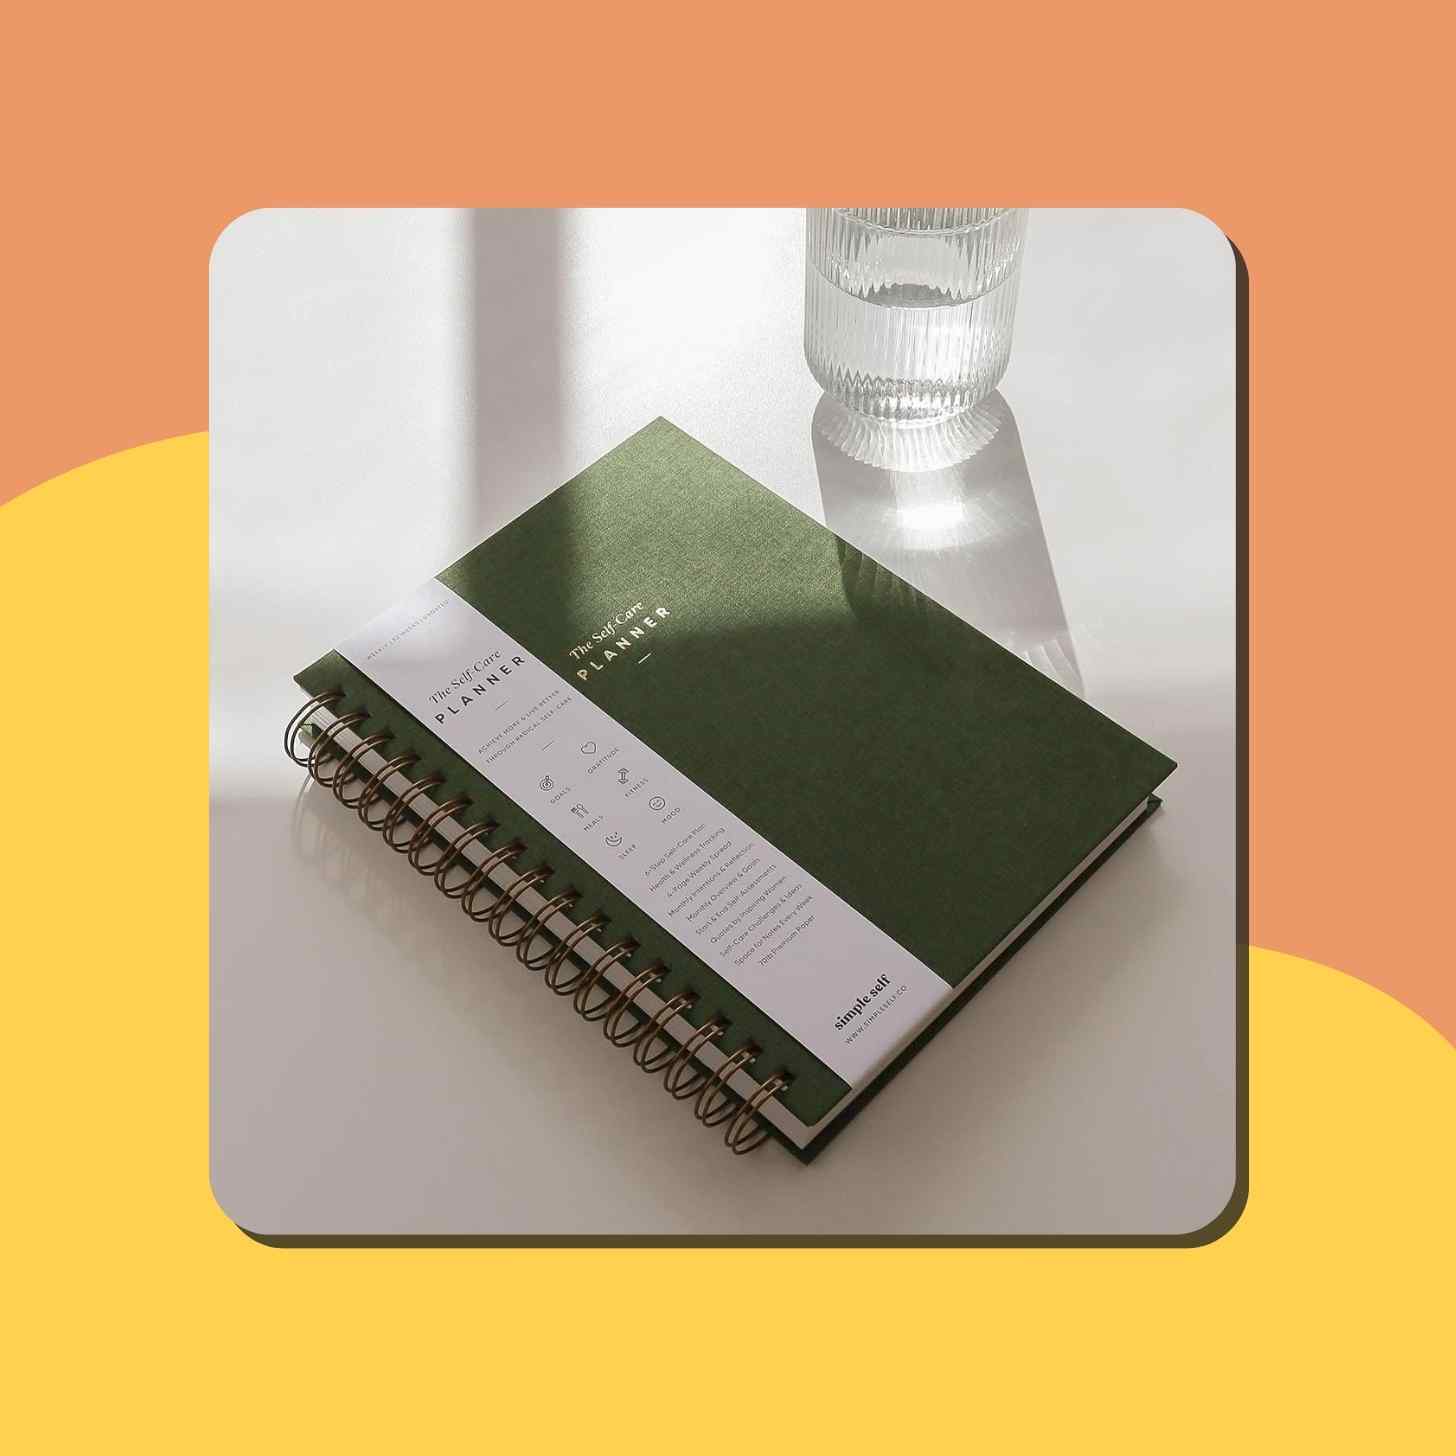 A Green Simple Self Care Planner On A Table Next To A Glass Of Water